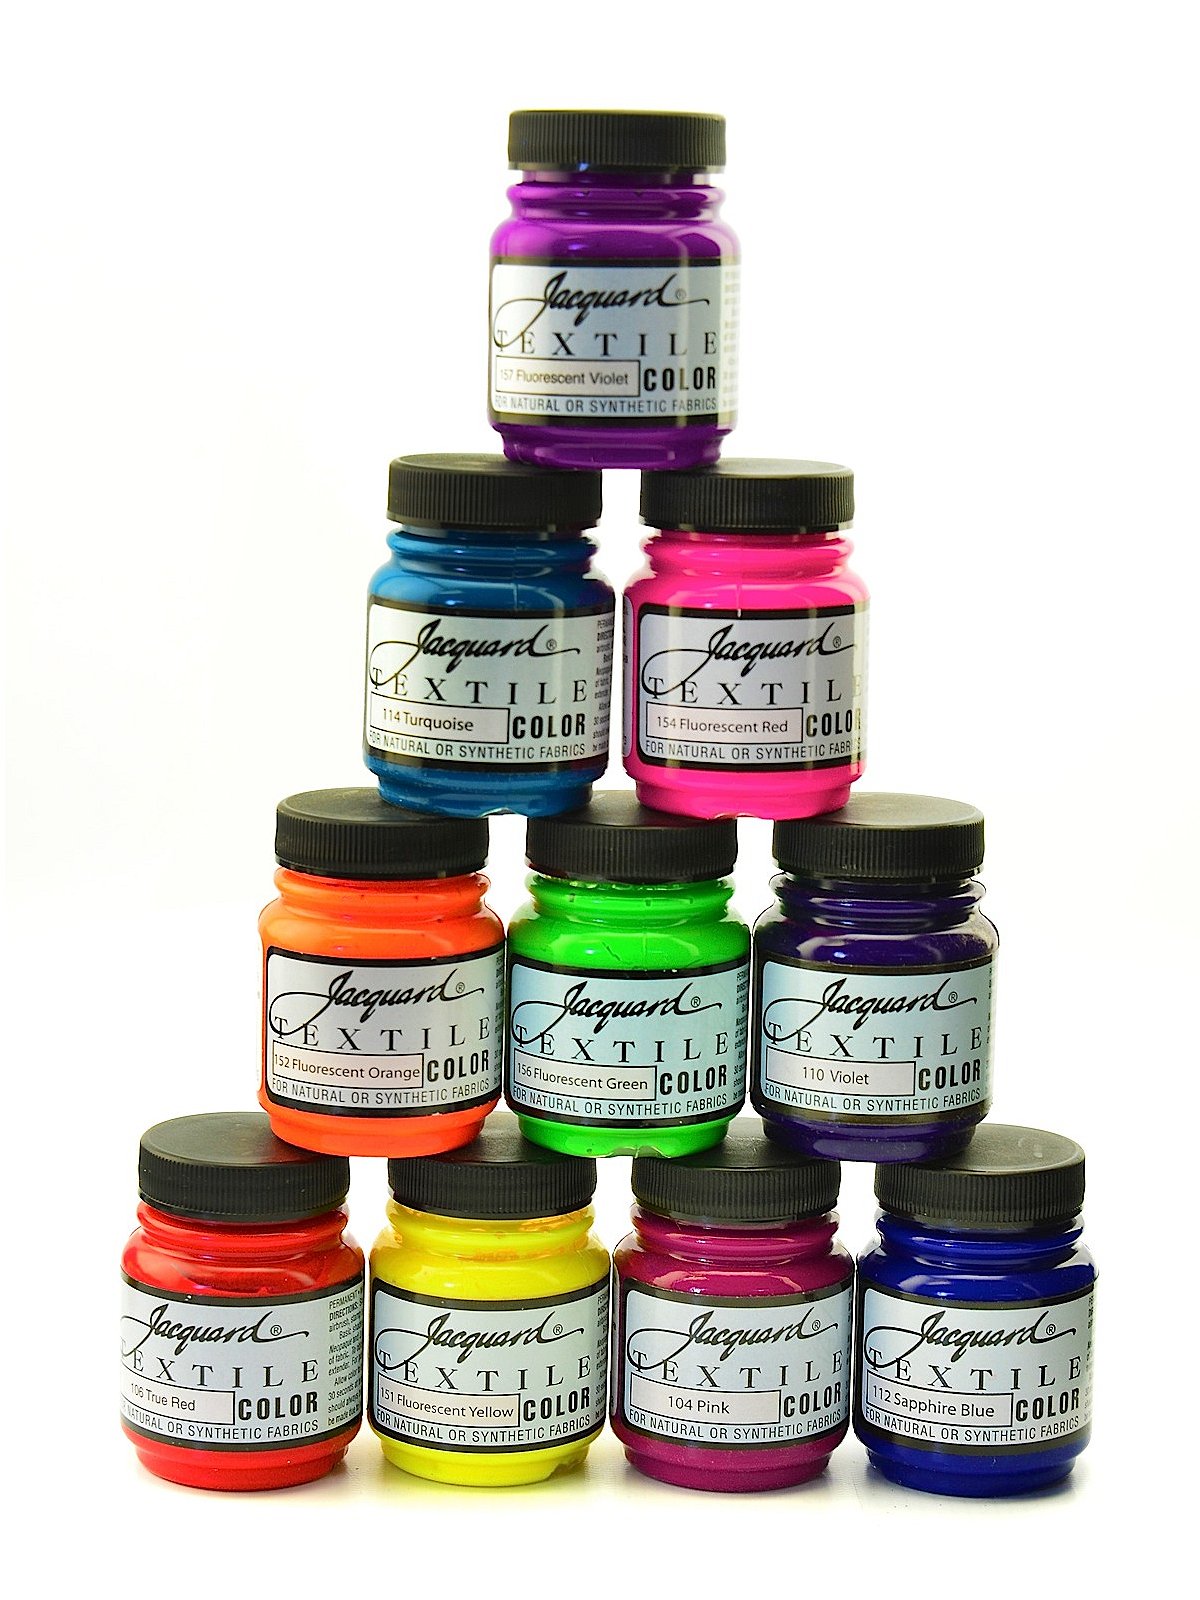 Jacquard Textile Color ☆ Fabric Paint for Perfect Results ☆